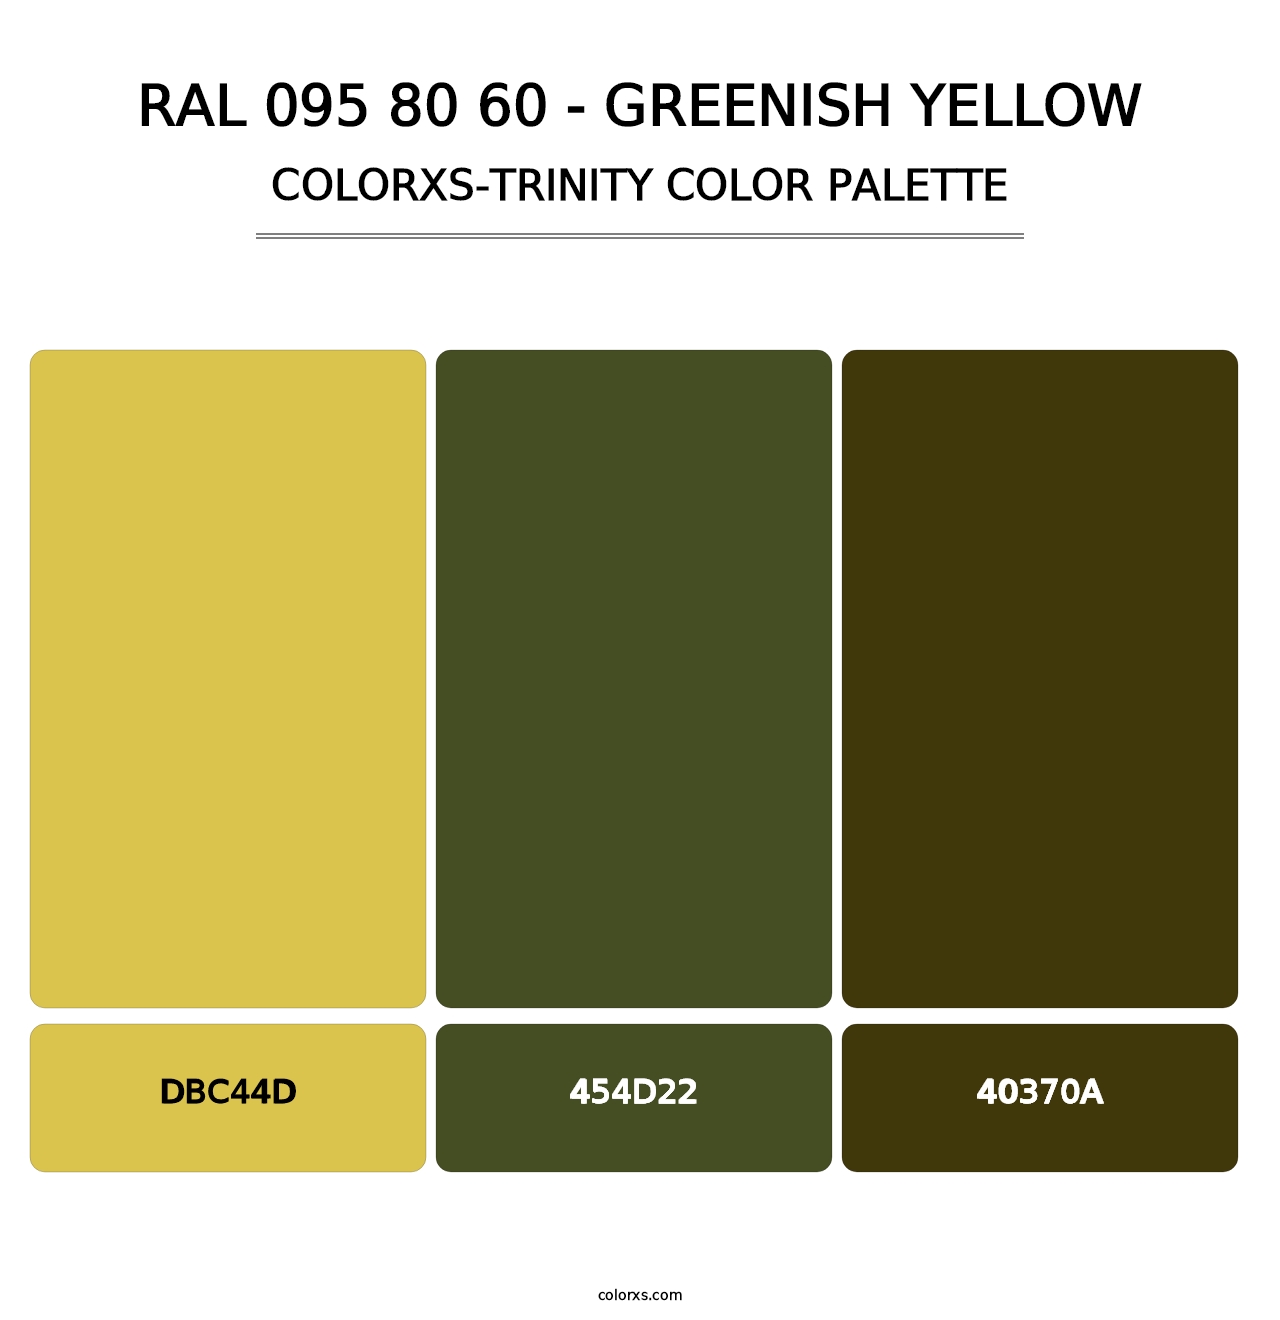 RAL 095 80 60 - Greenish Yellow - Colorxs Trinity Palette